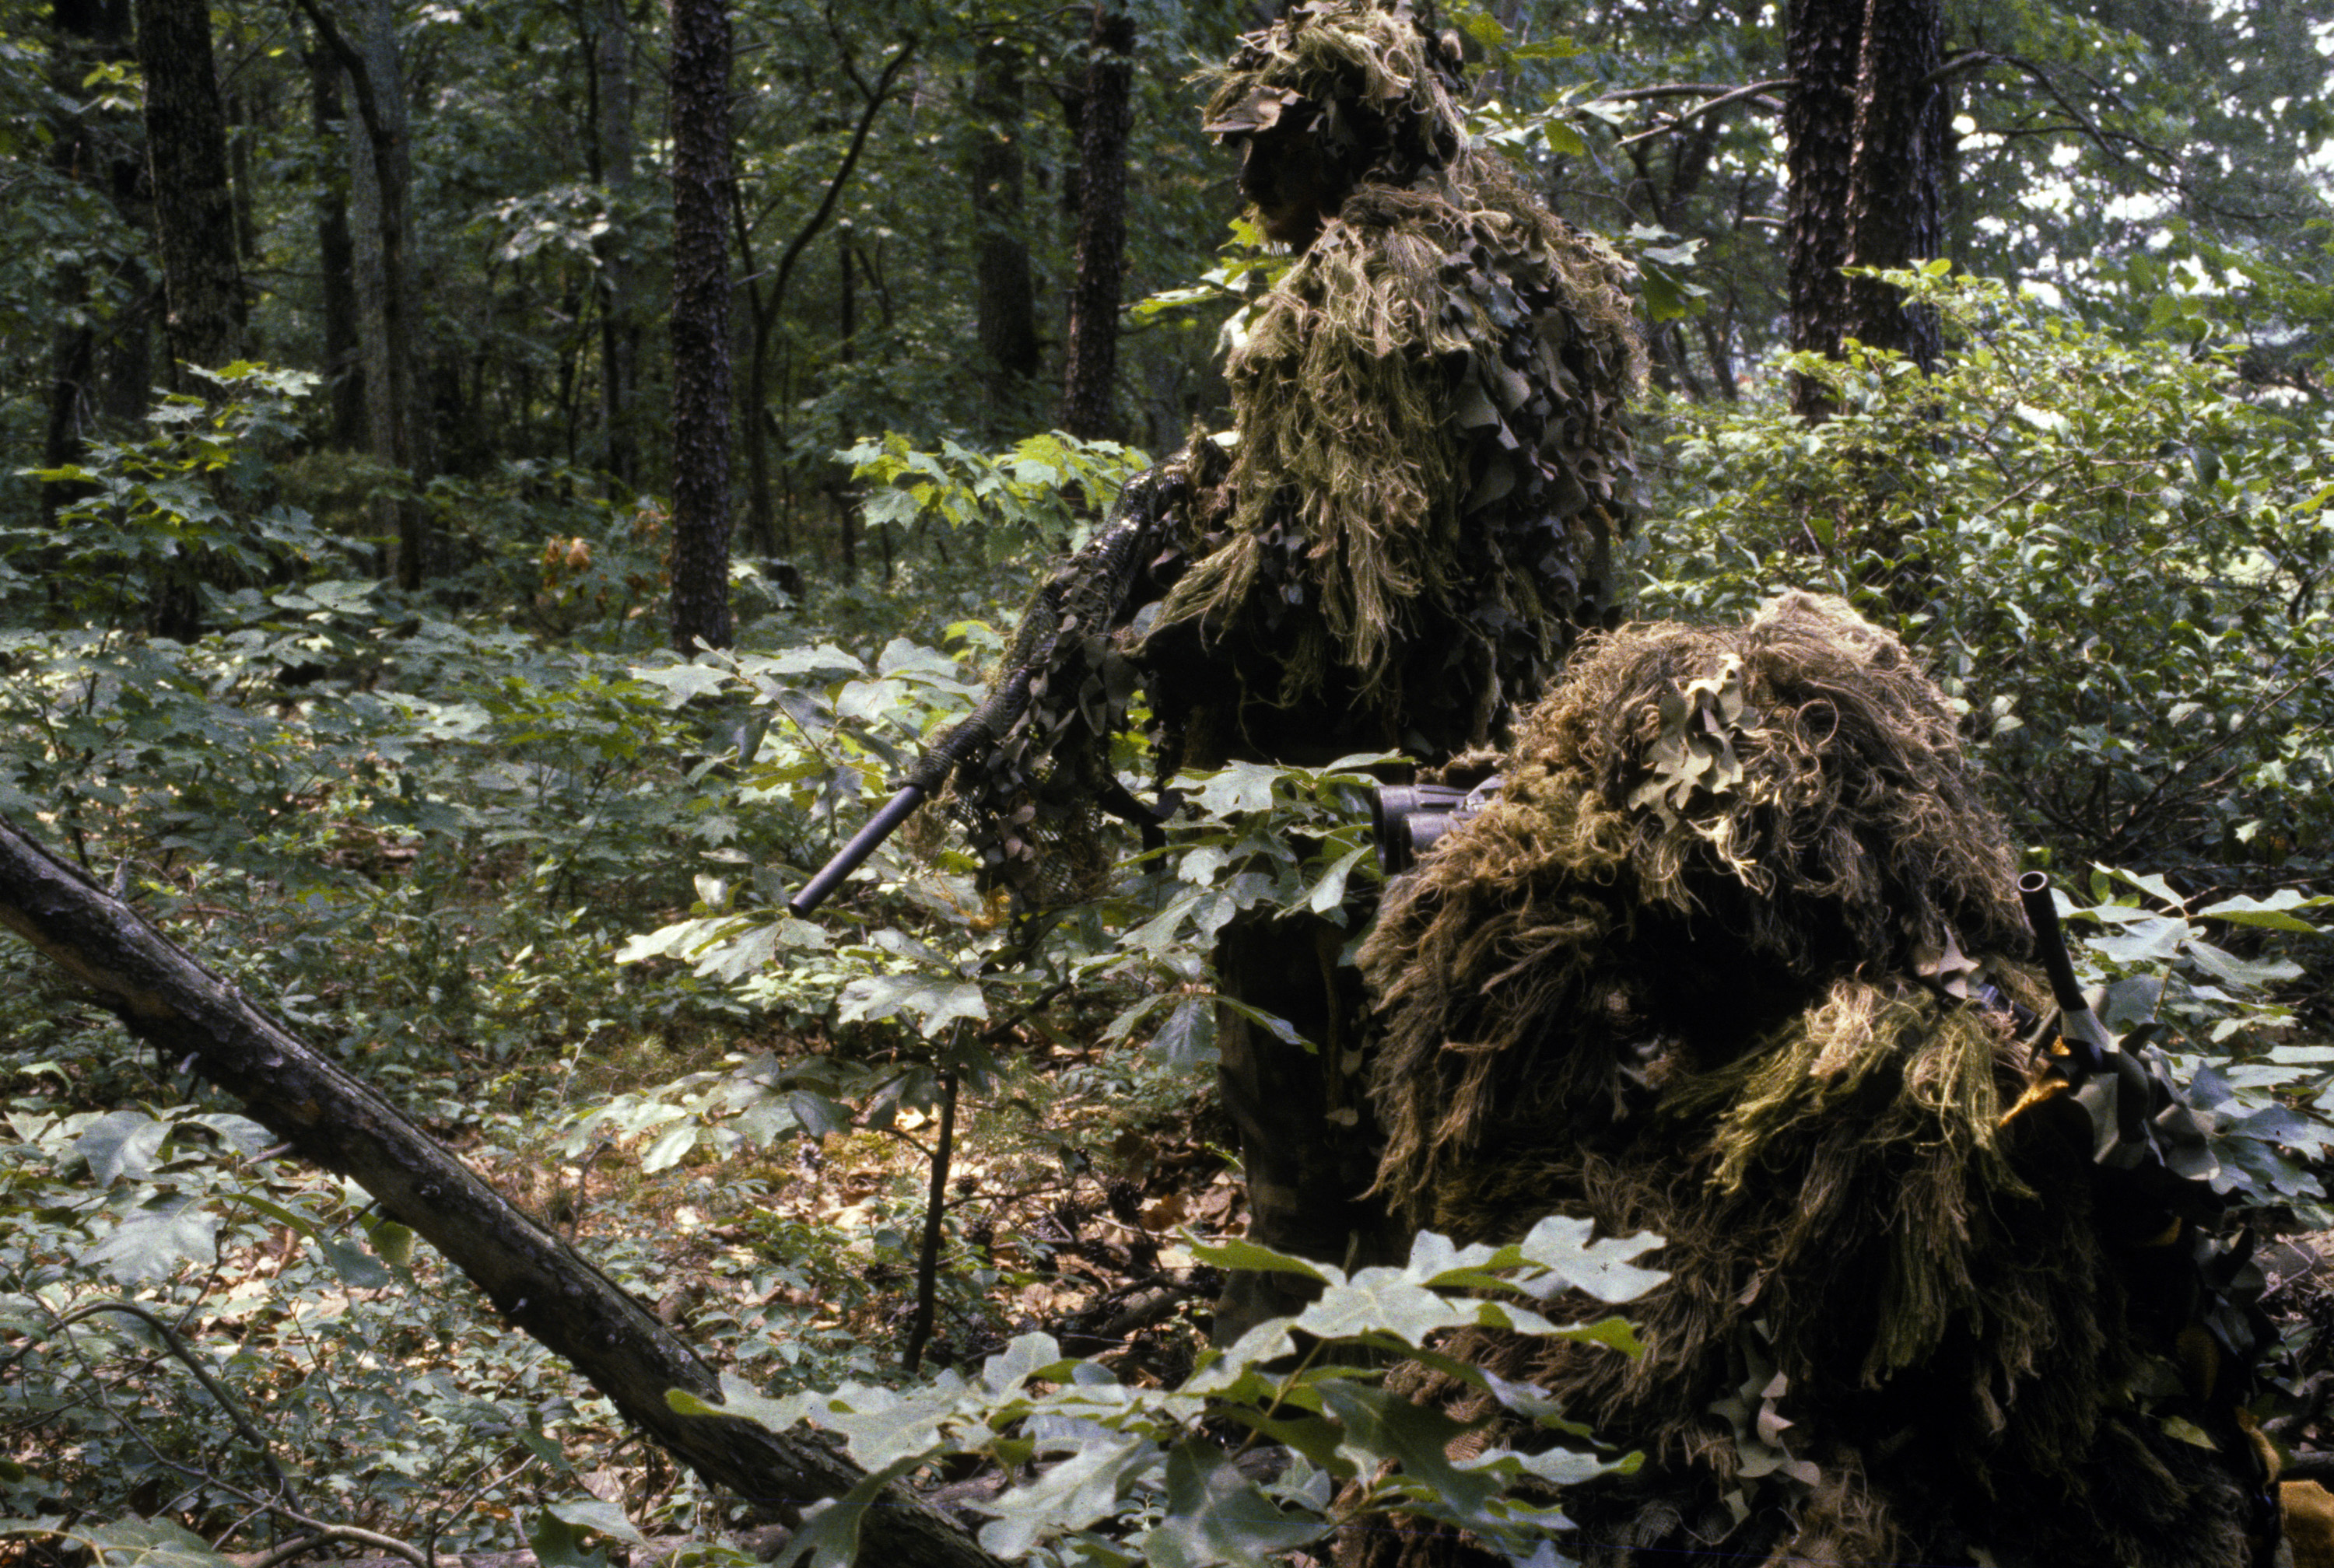 Military Snipers Camouflage Gilly Suit Sniper Team Hd